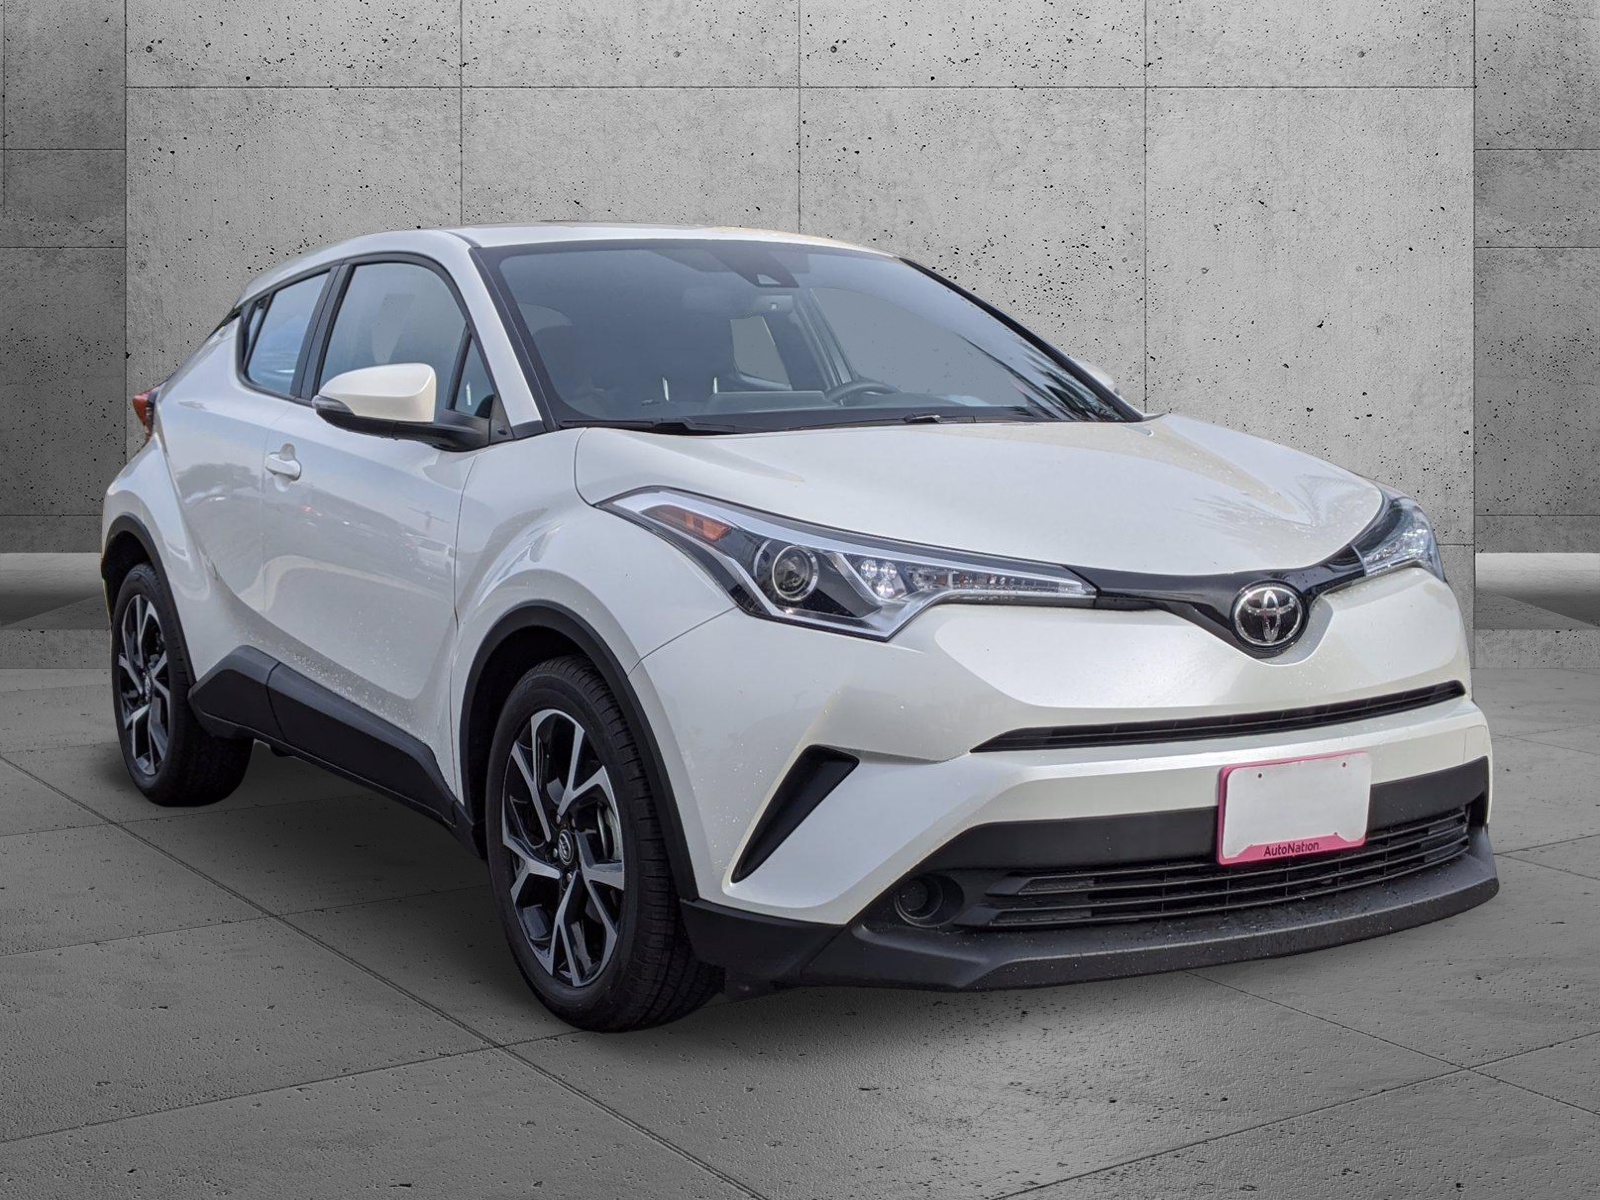 PreOwned 2018 Toyota CHR XLE Sport Utility in Cerritos 